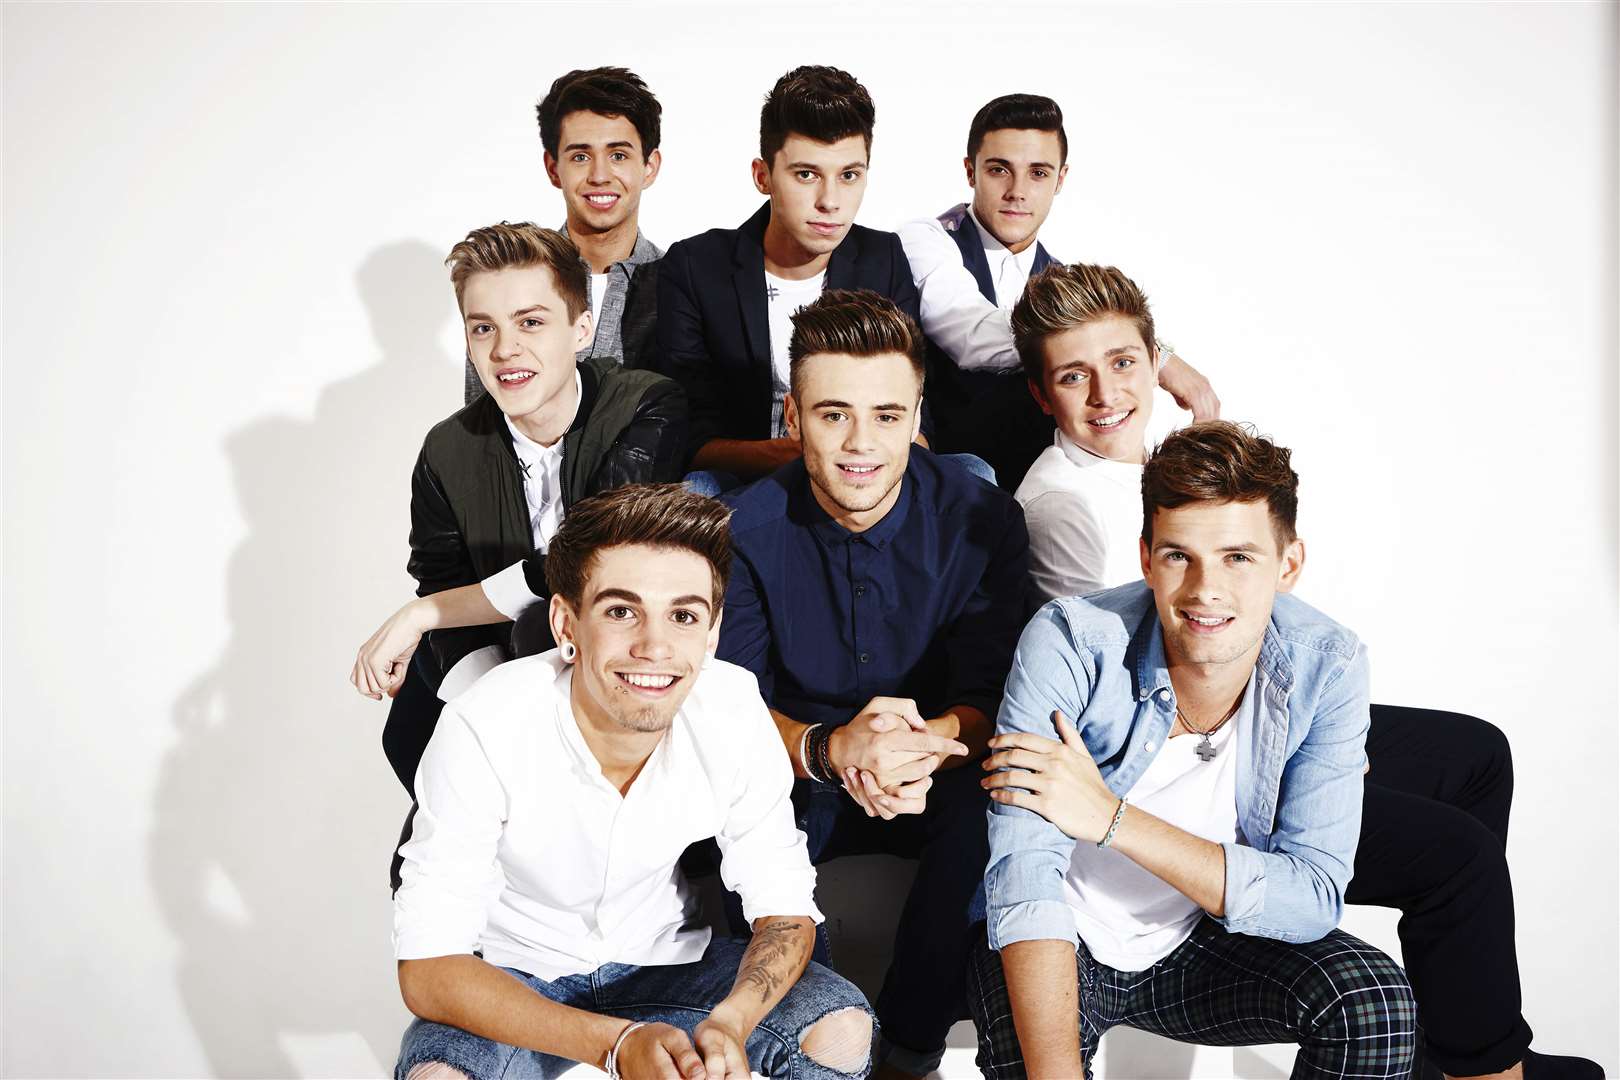 Kent's Charlie Jones, from X Factor boyband Stereo Kicks, is far right on the middle row